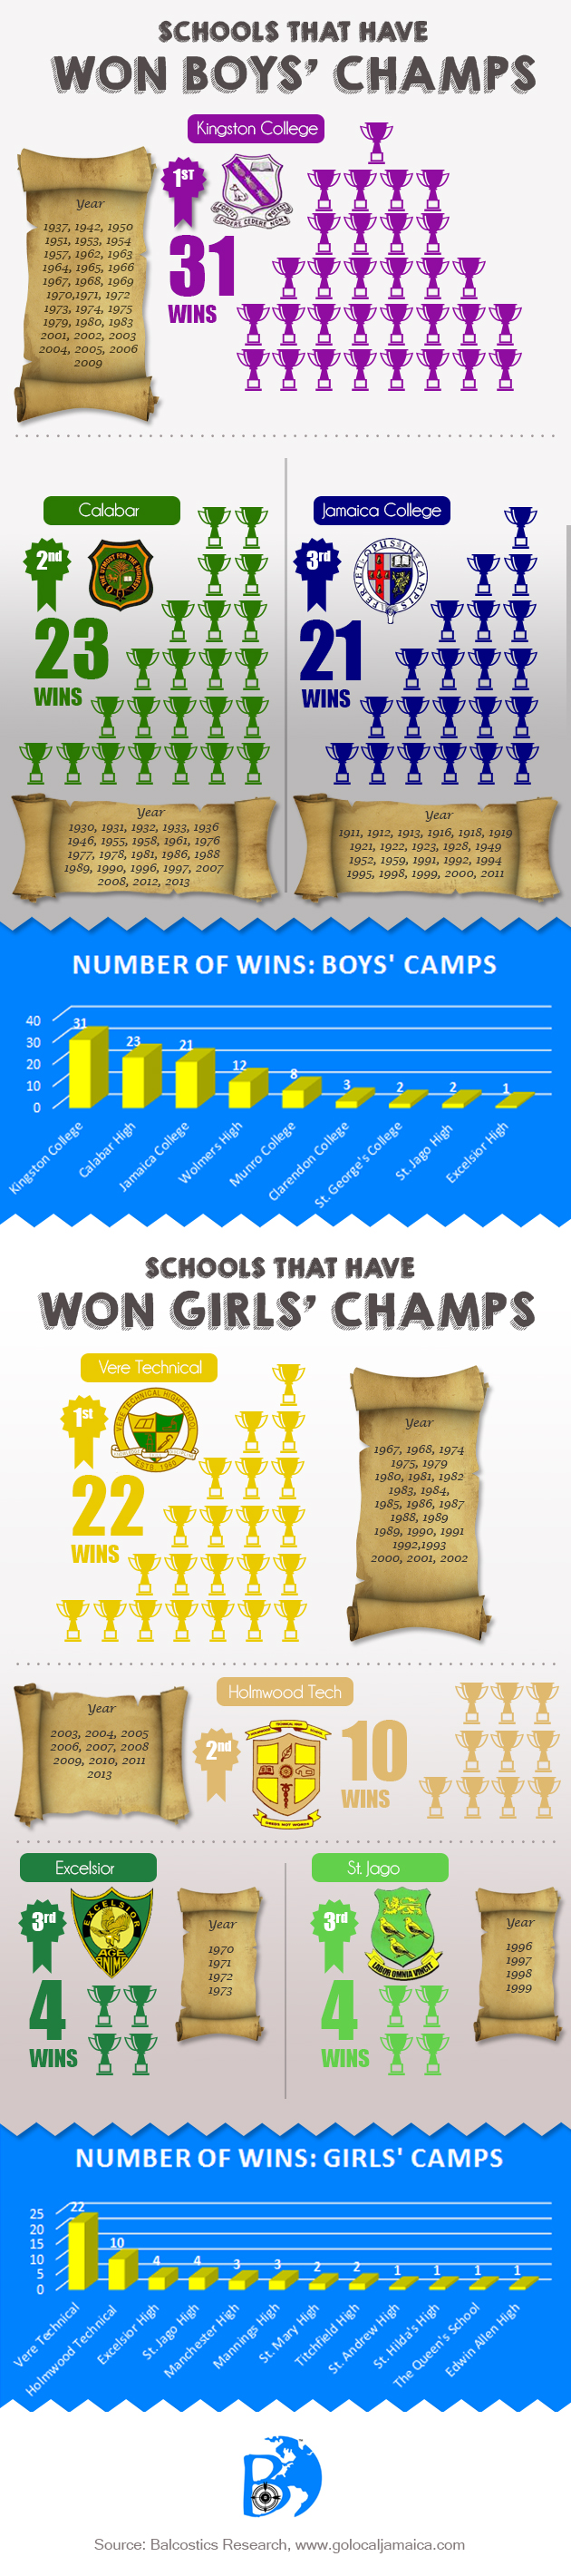 Boys and Girls Championship Infographic